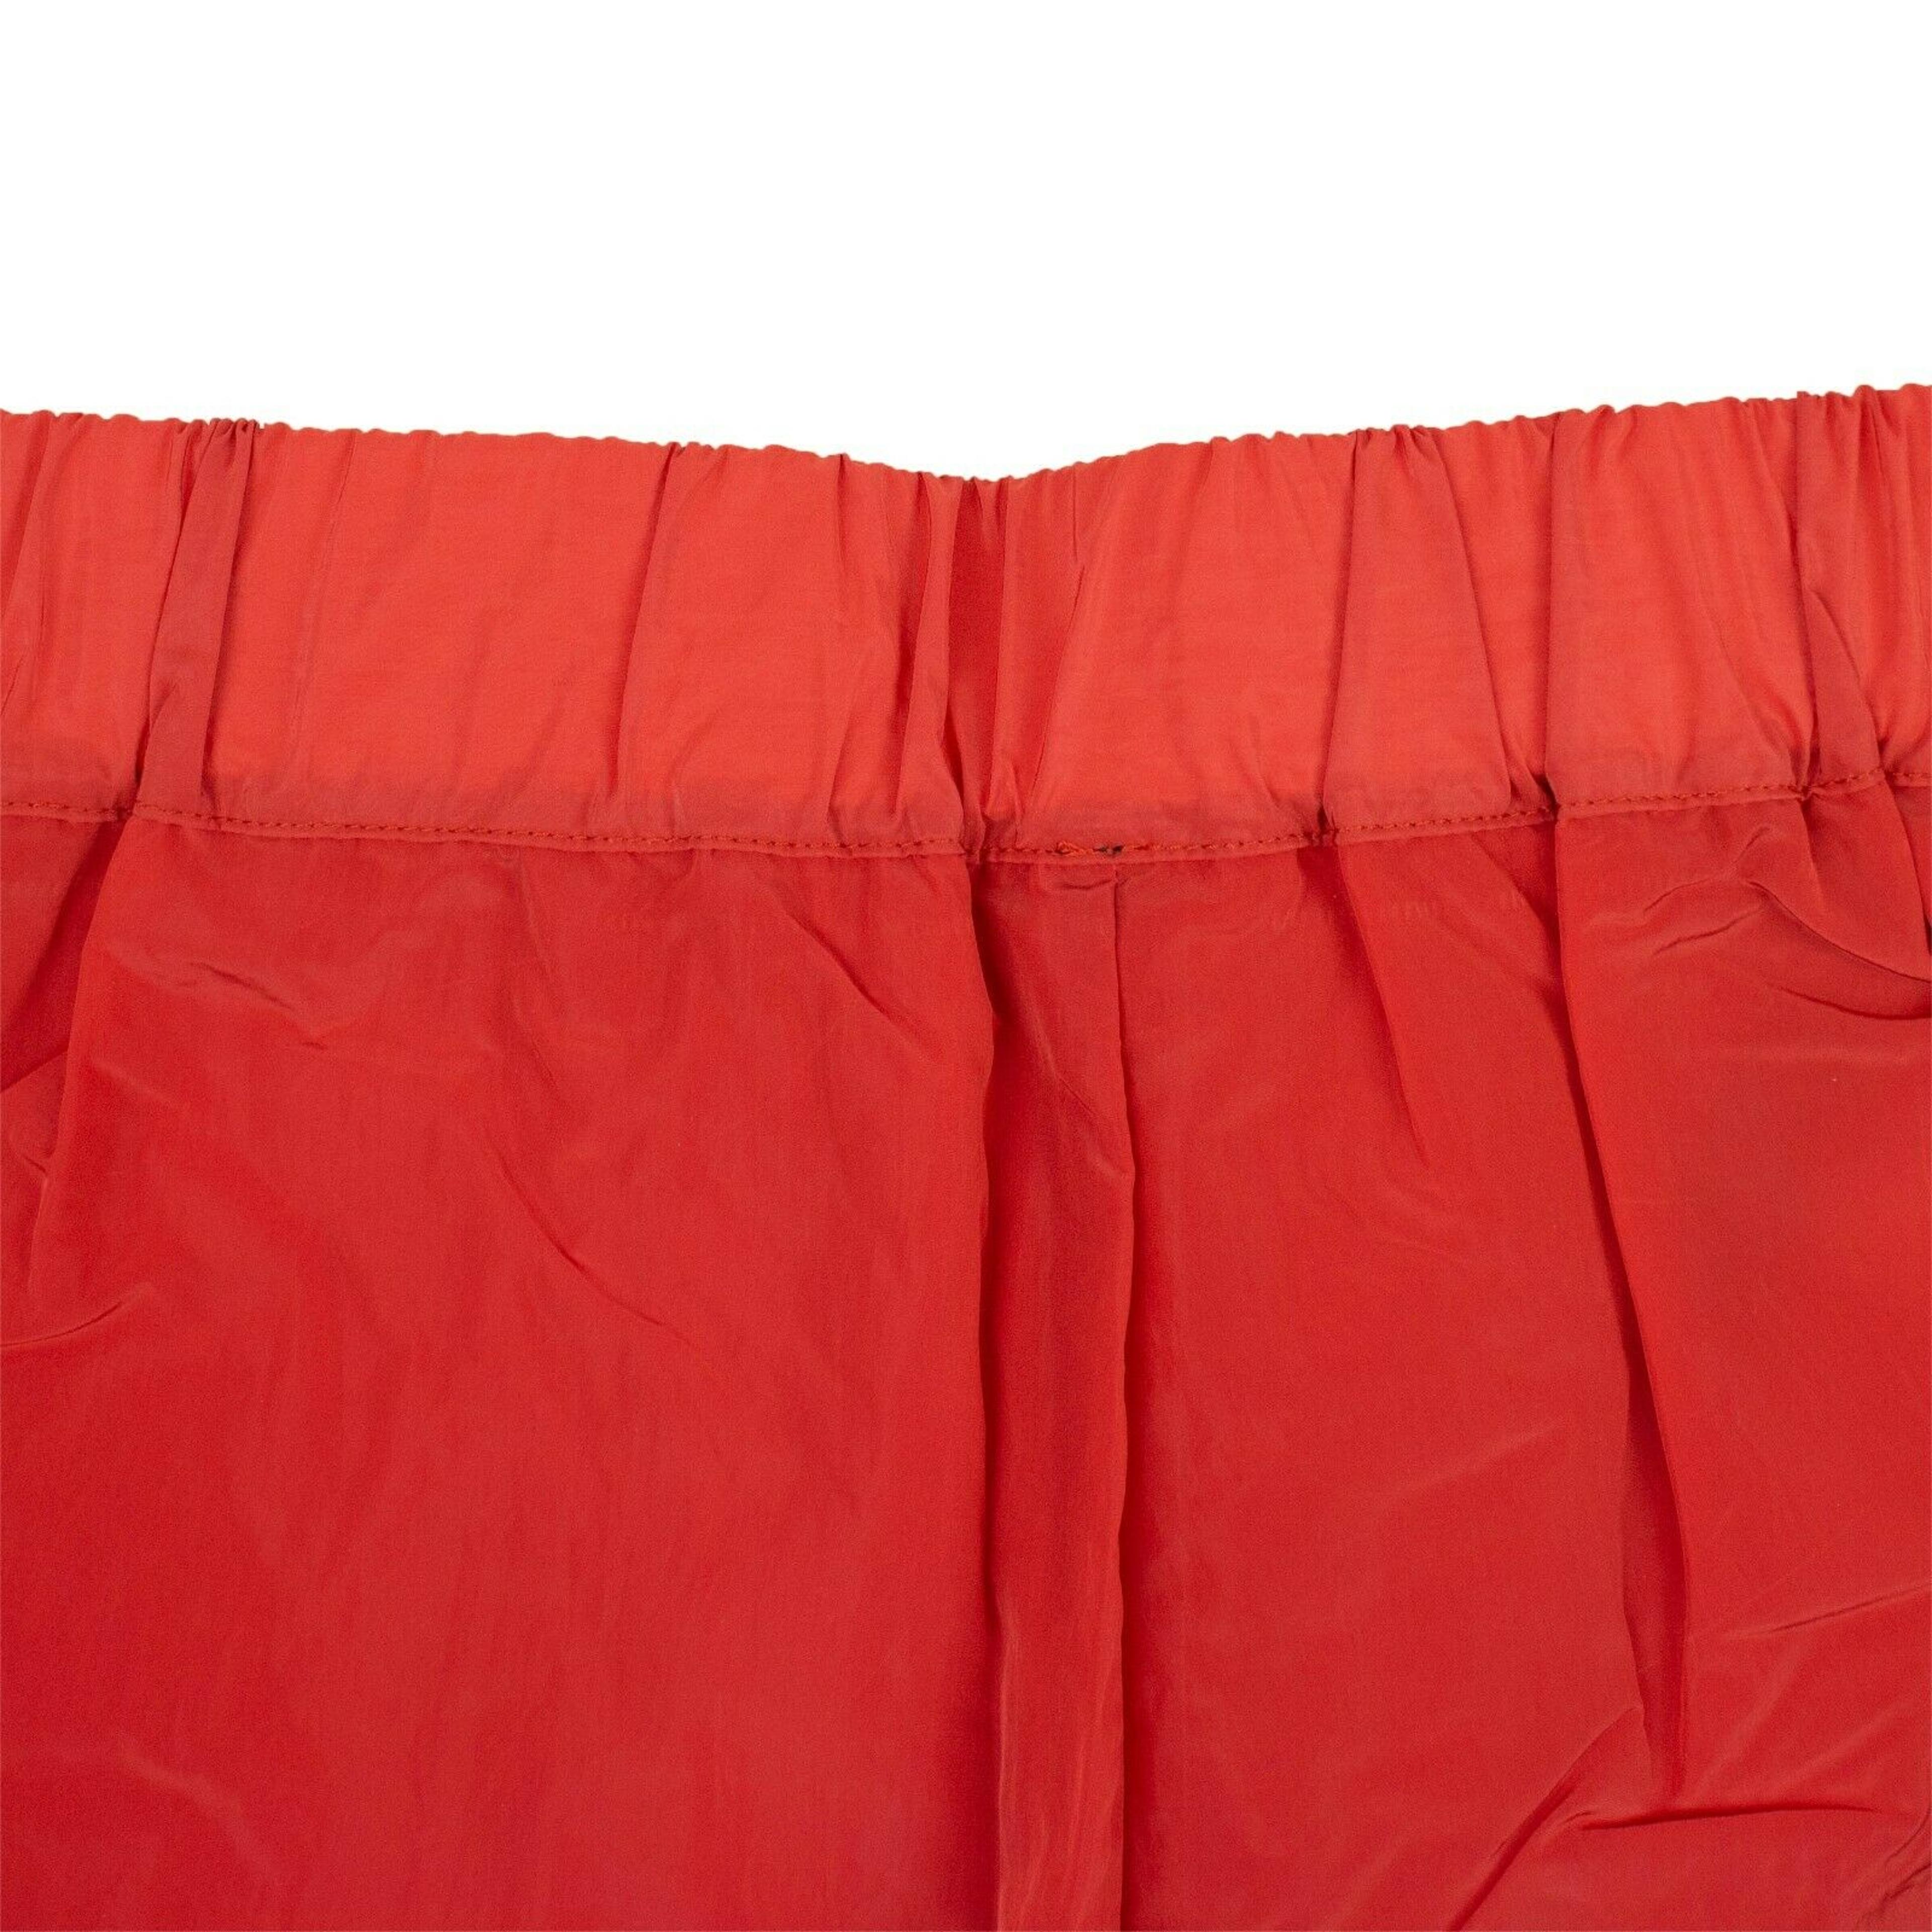 Alternate View 3 of Unravel Project Lace Up Track Short Pants - Red